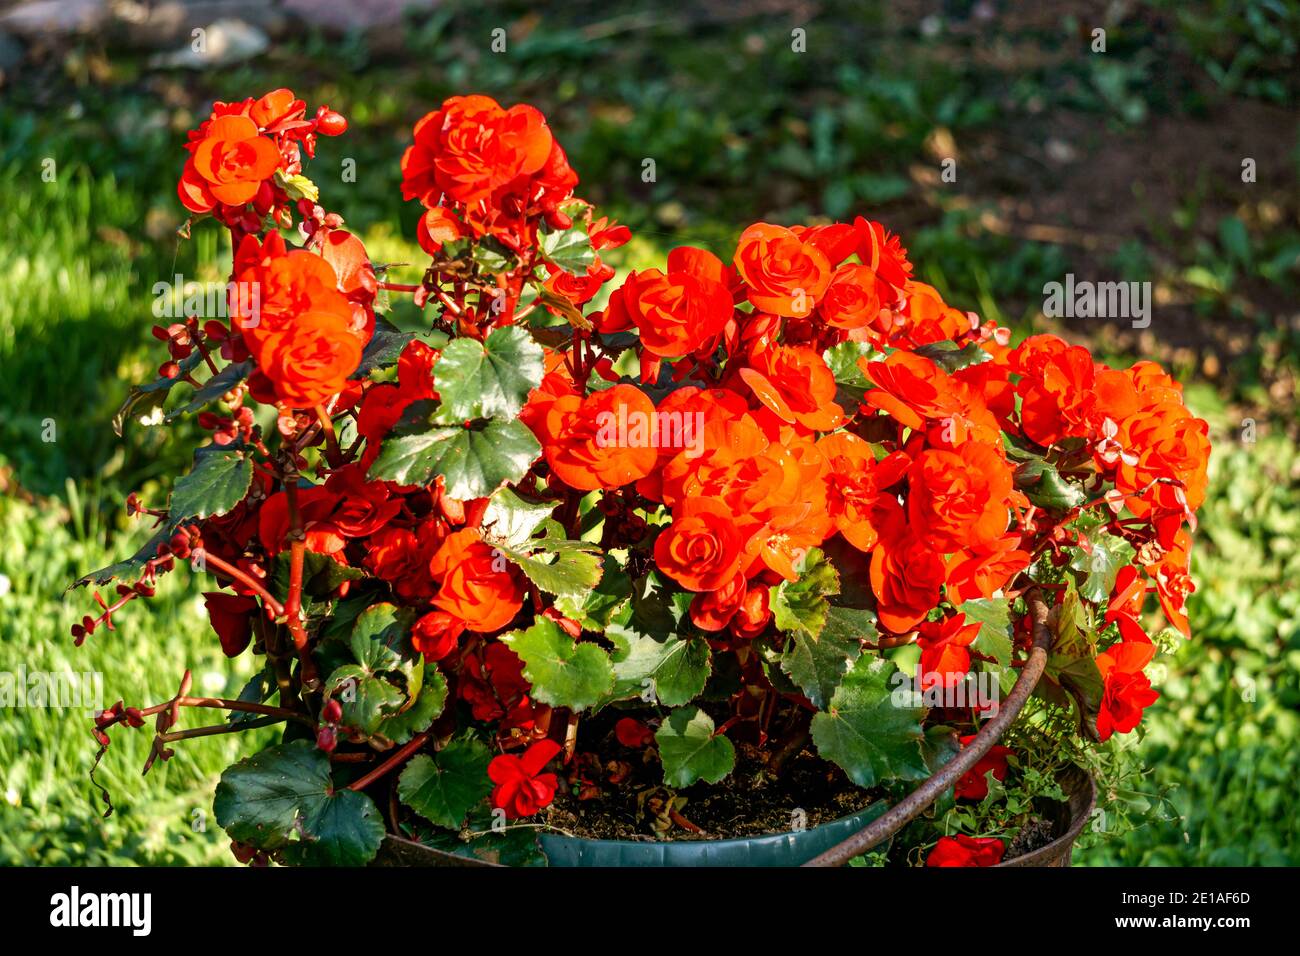 Large red begonia flowers on a background of green leaves in a flower pot. Stock Photo